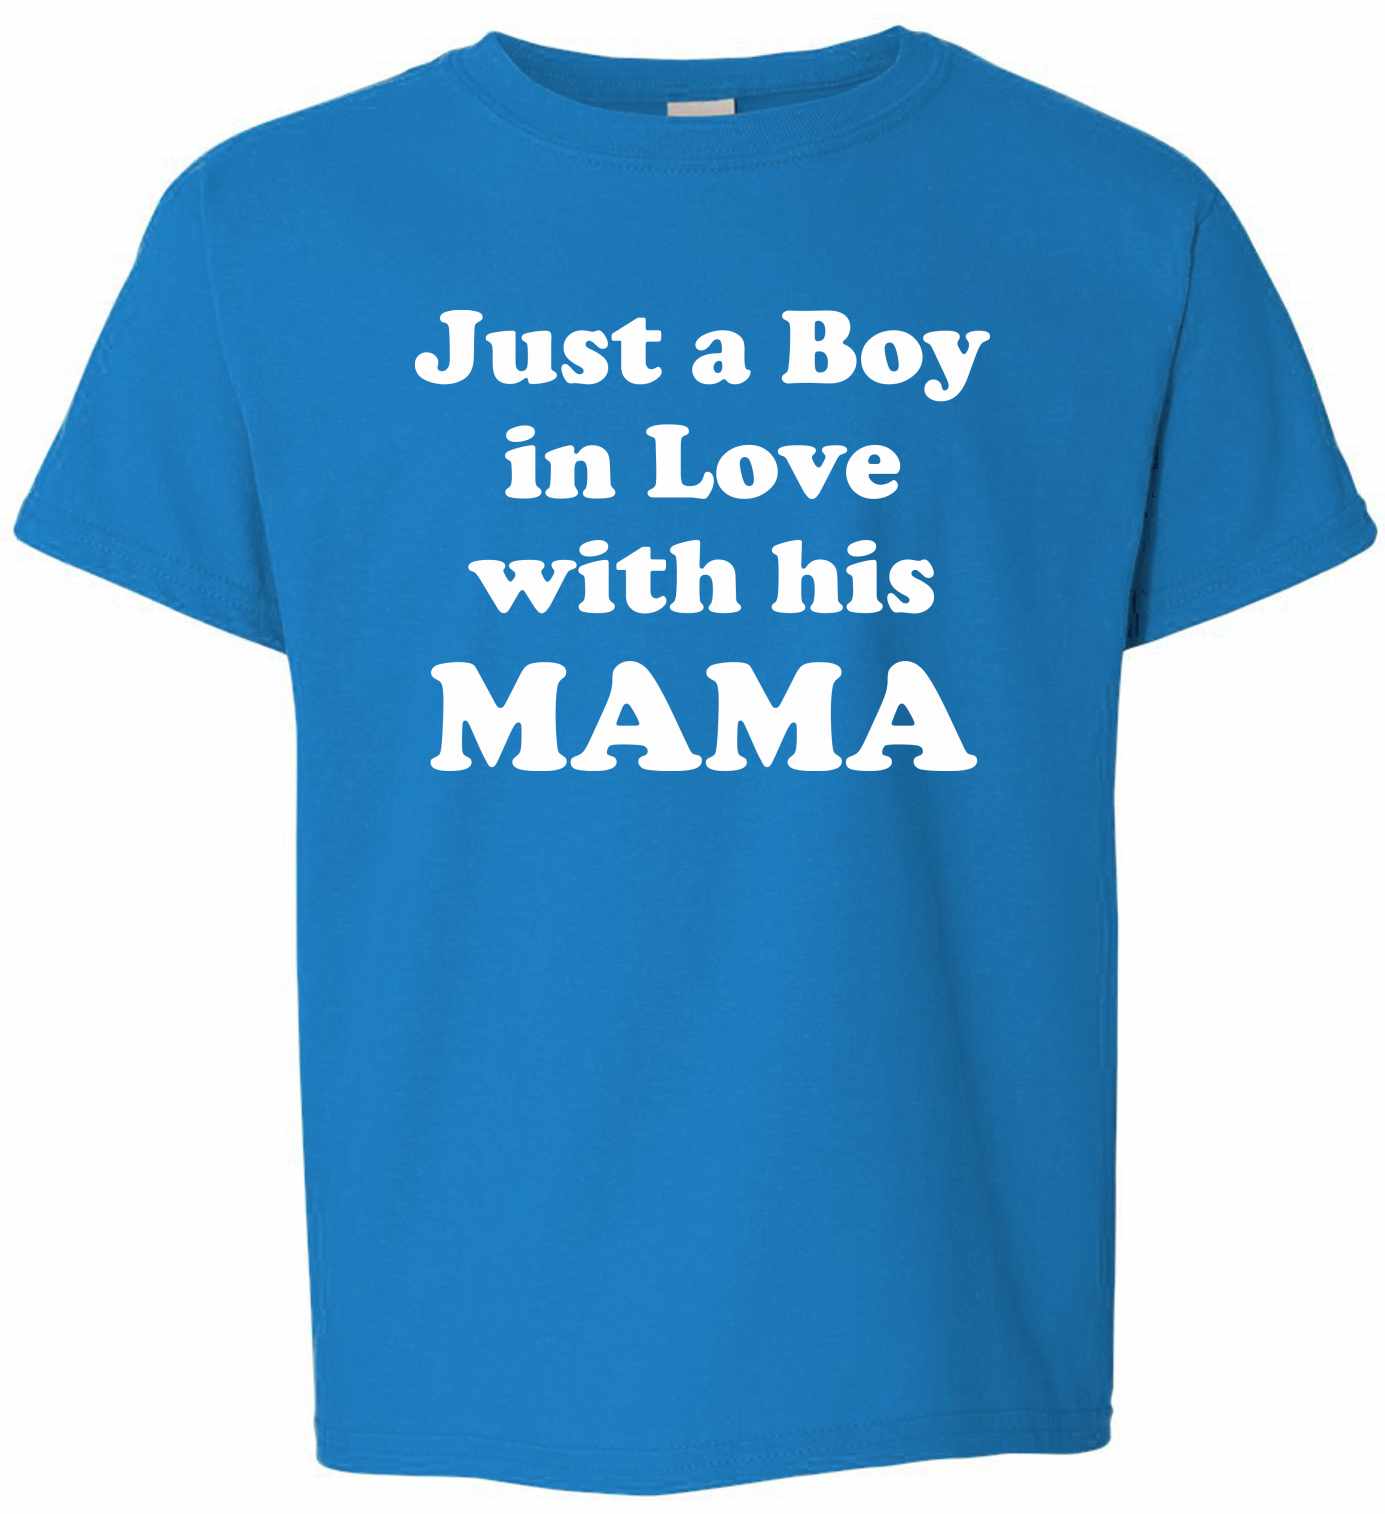 Just a Boy in Love with his MAMA on Kids T-Shirt